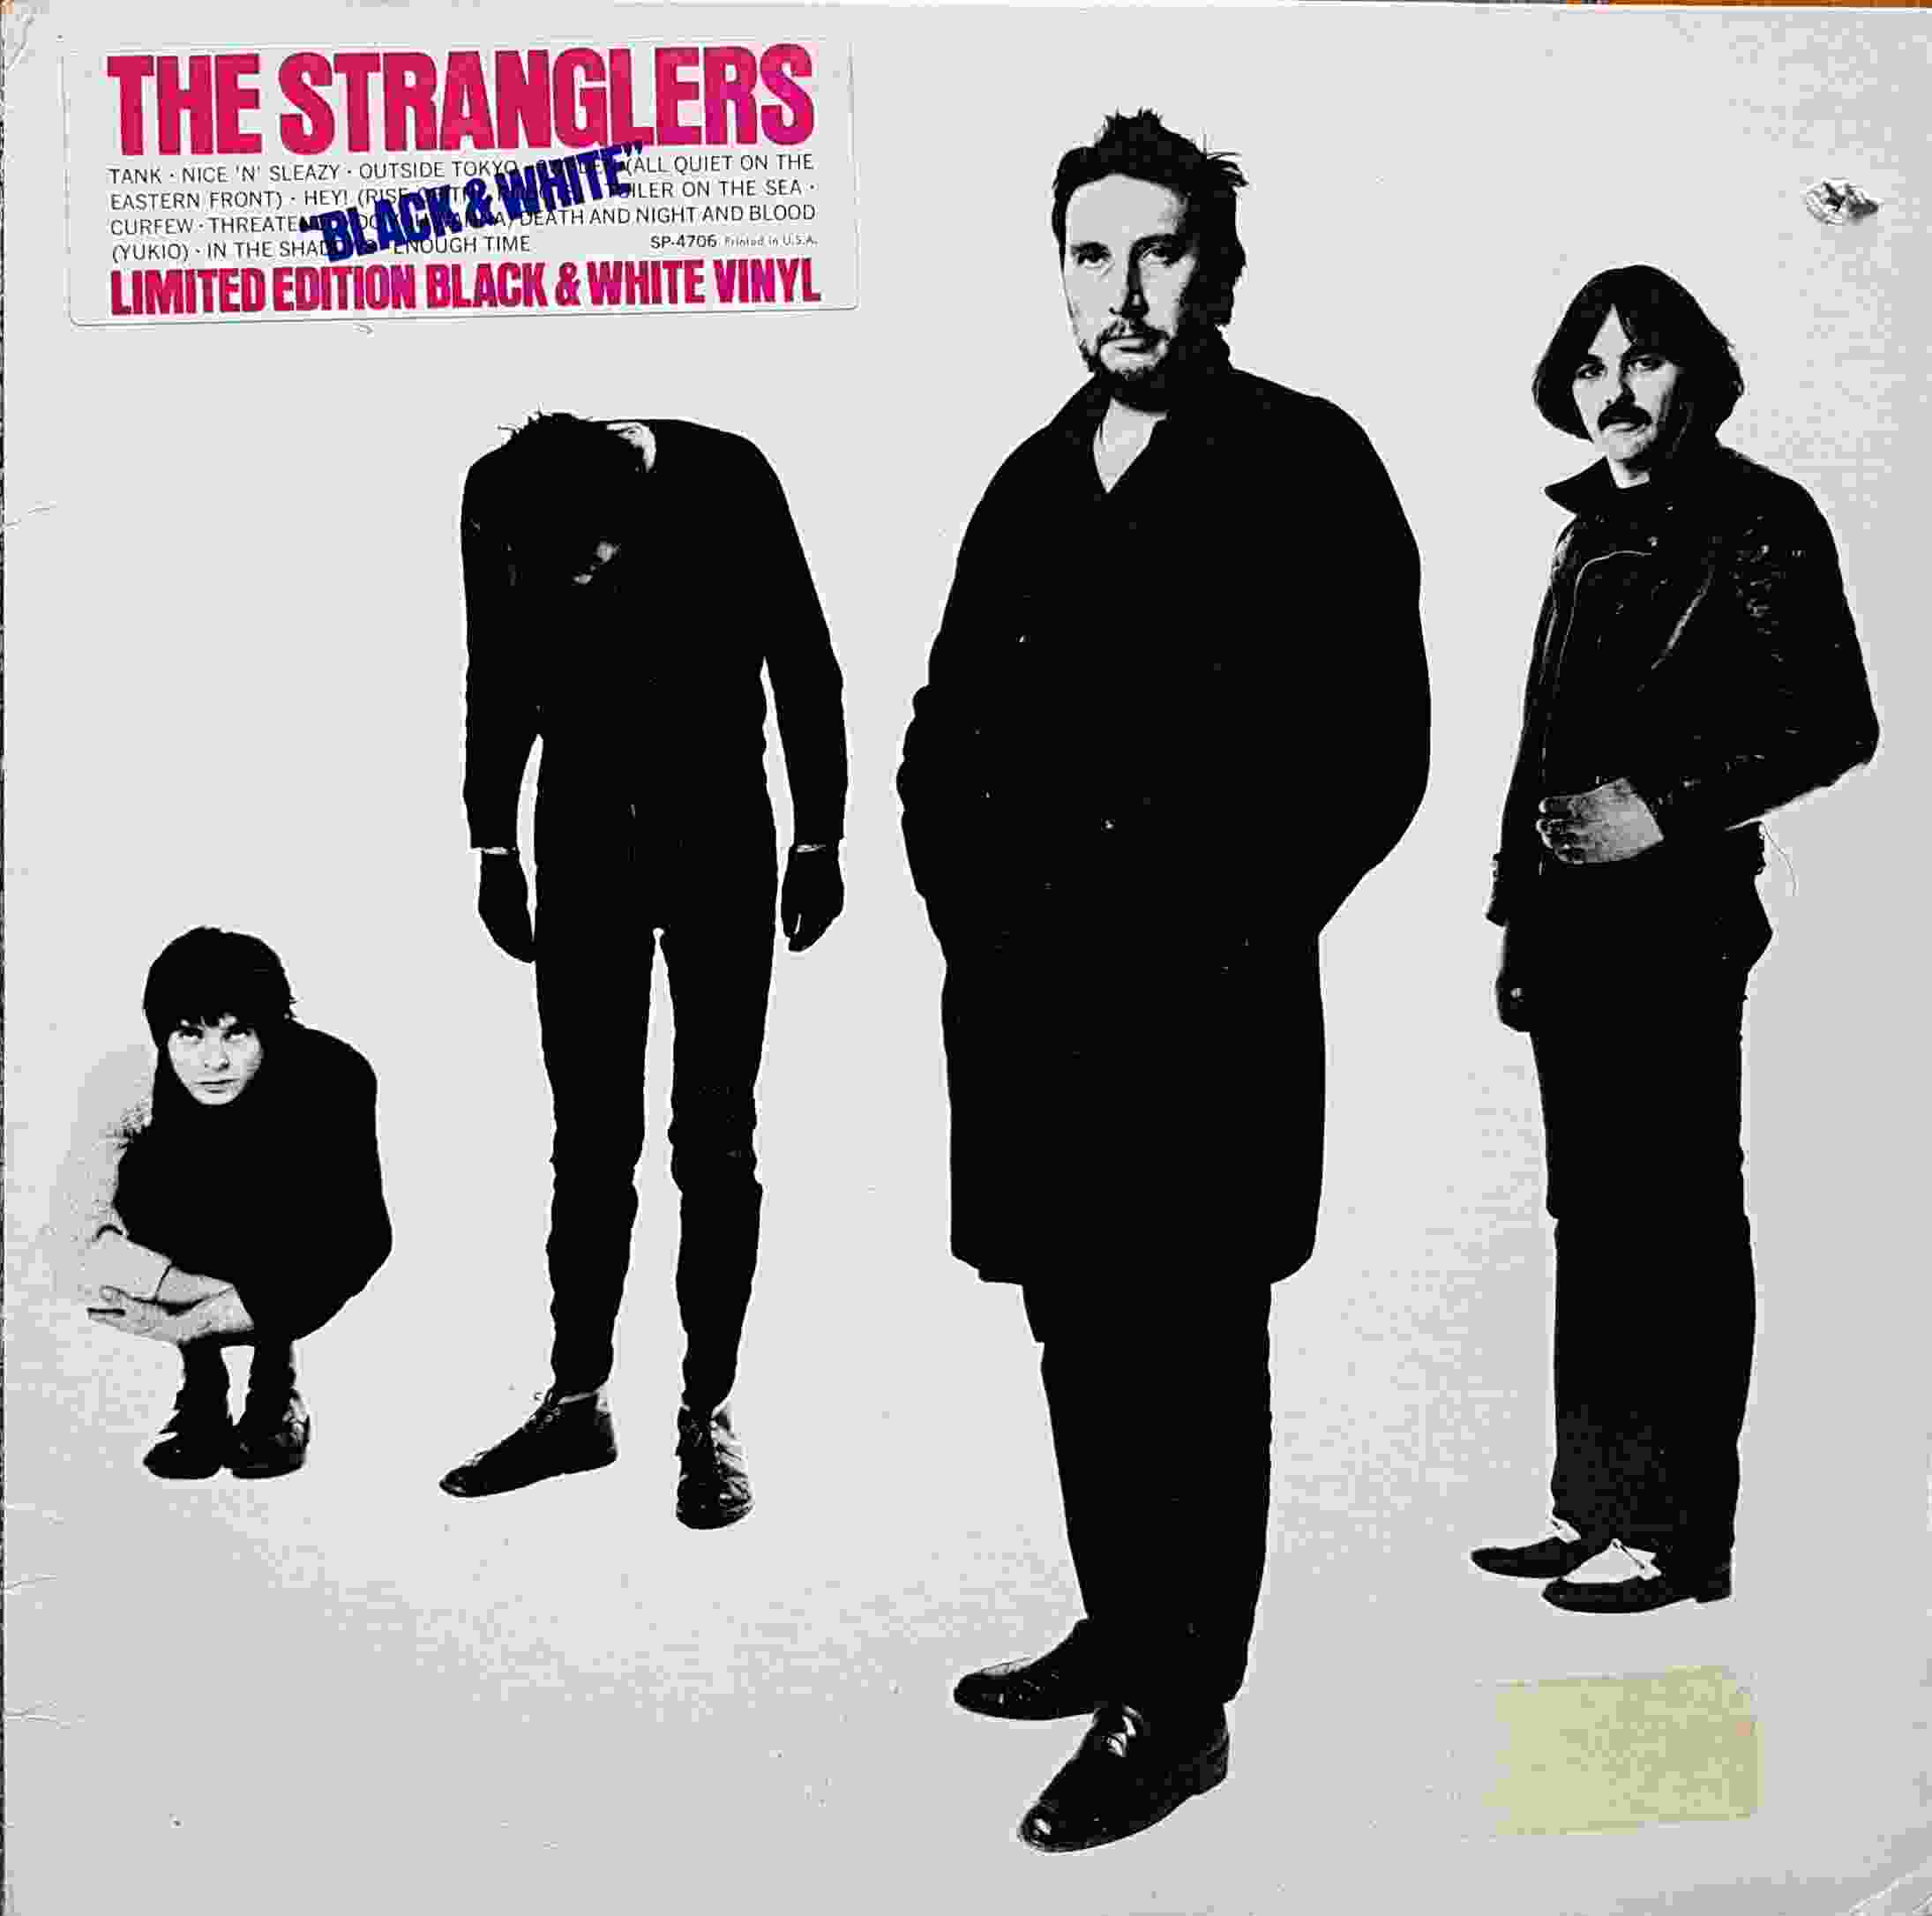 Picture of Black and white by artist The Stranglers  from The Stranglers albums